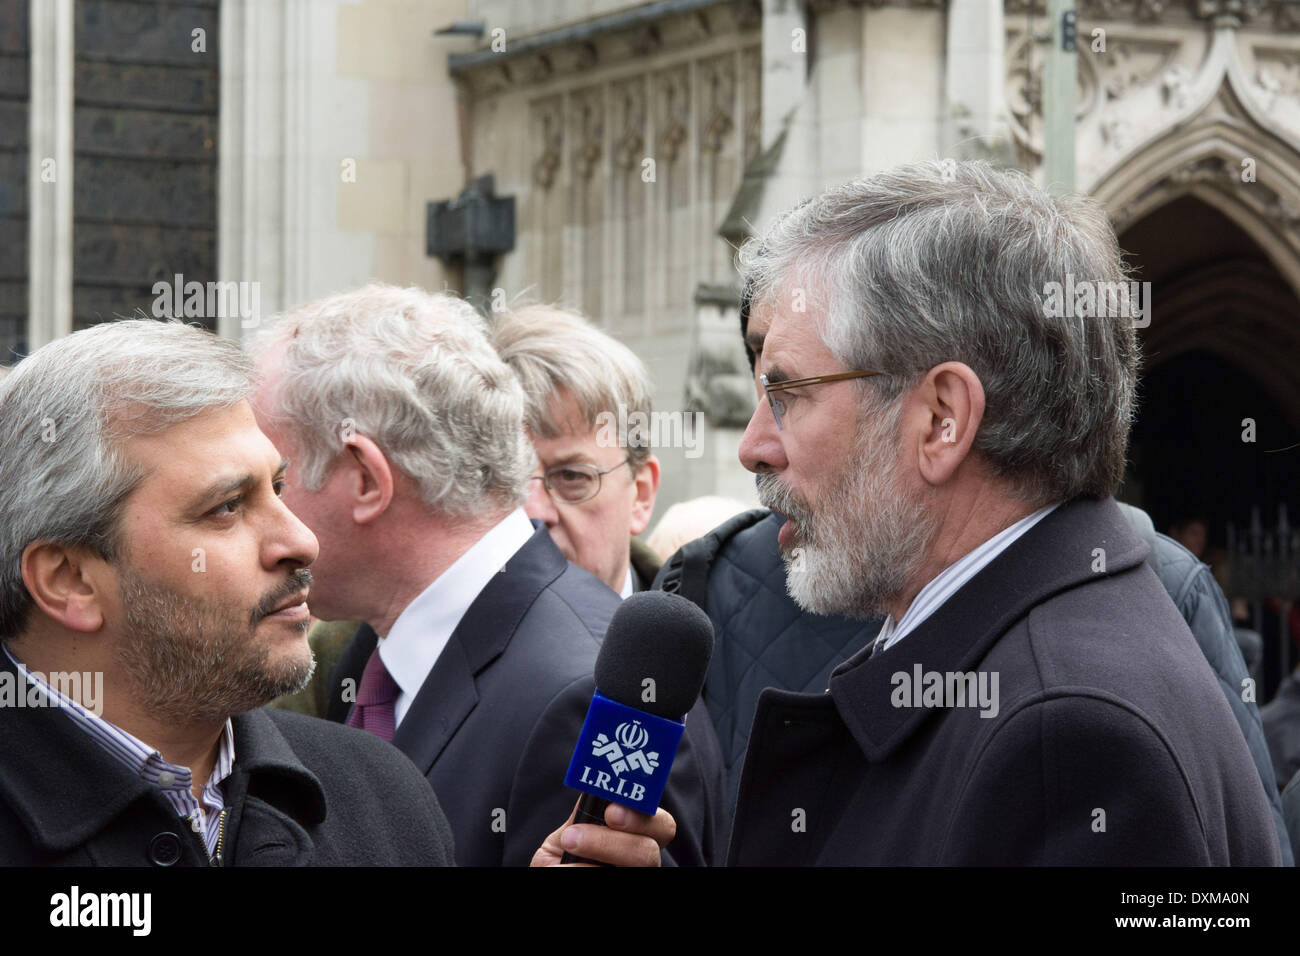 London, UK . 27th Mar, 2014. President of Sinn Féin Gerry Adams (right) is interviewed after the funeral service of Tony Benn. Tony Benn was a British Labour politician and a Member of Parliament (MP) for 47 years between 1950 and 2001. He died at the age of 88. Credit:  Patricia Phillips/Alamy Live News Stock Photo